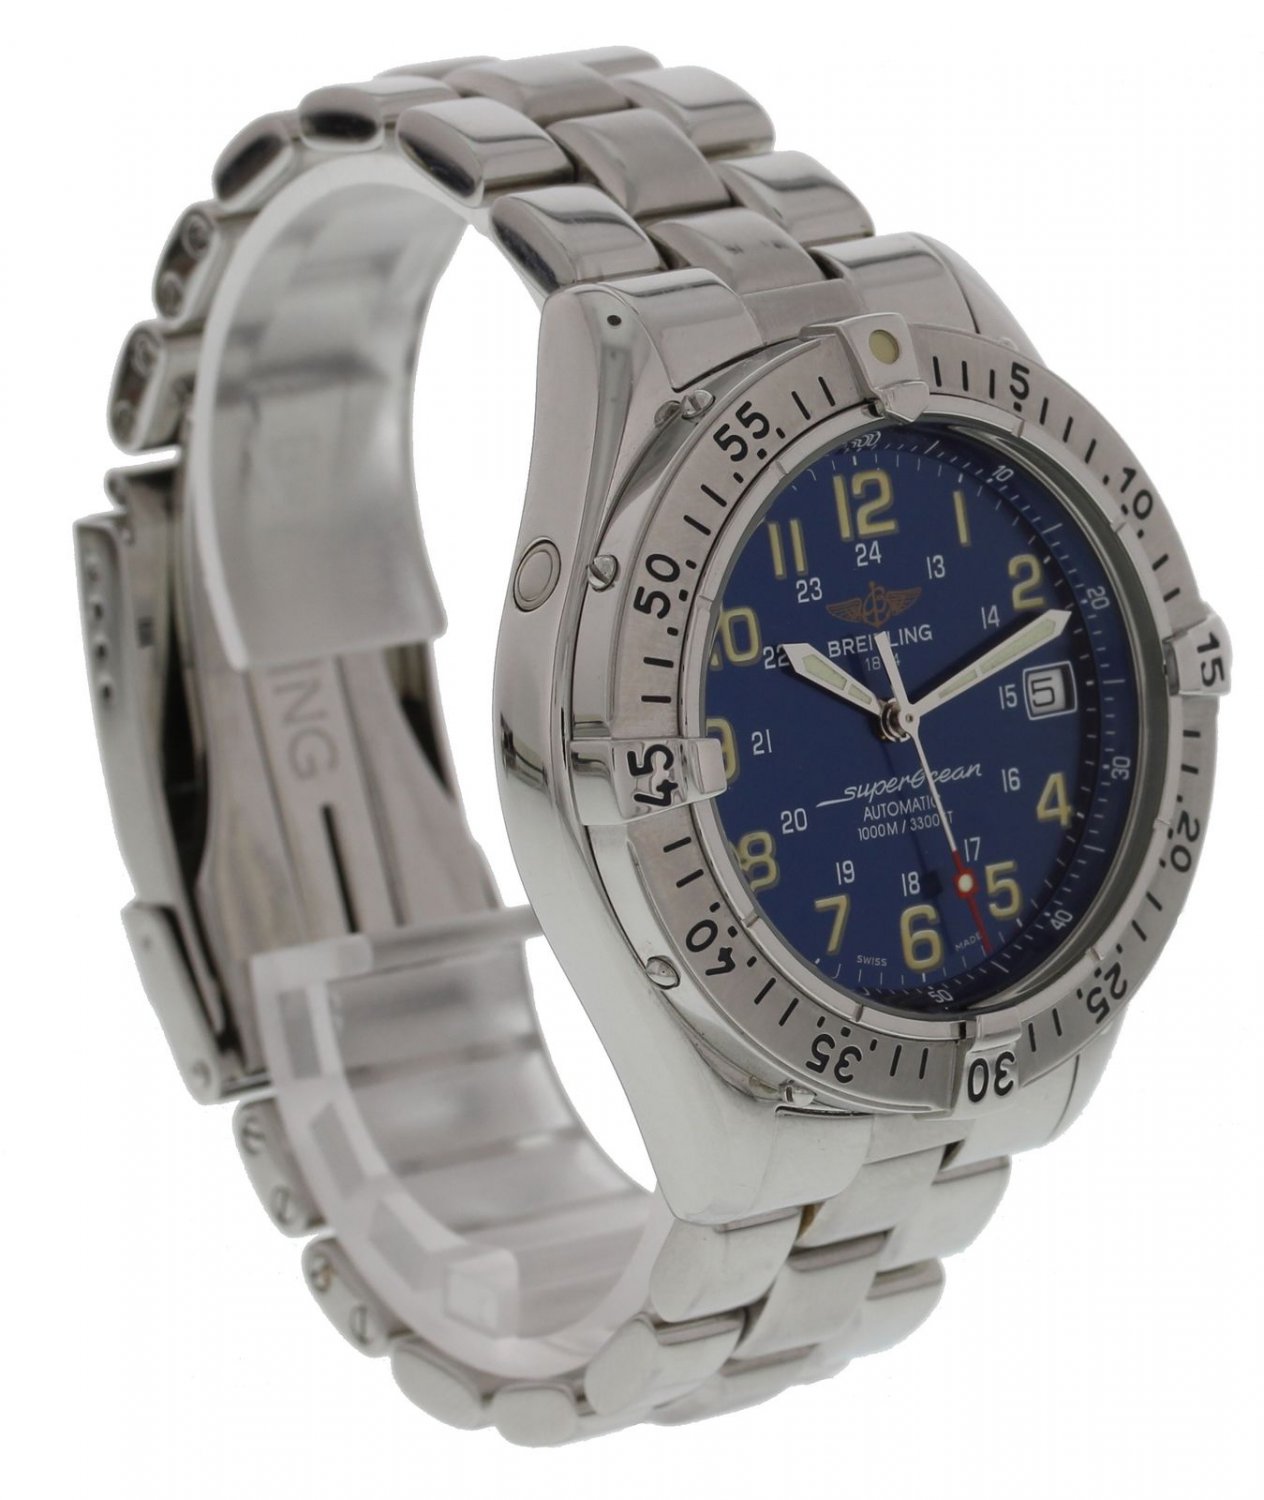 Breitling Superocean A17040 Stainless Steel Automatic